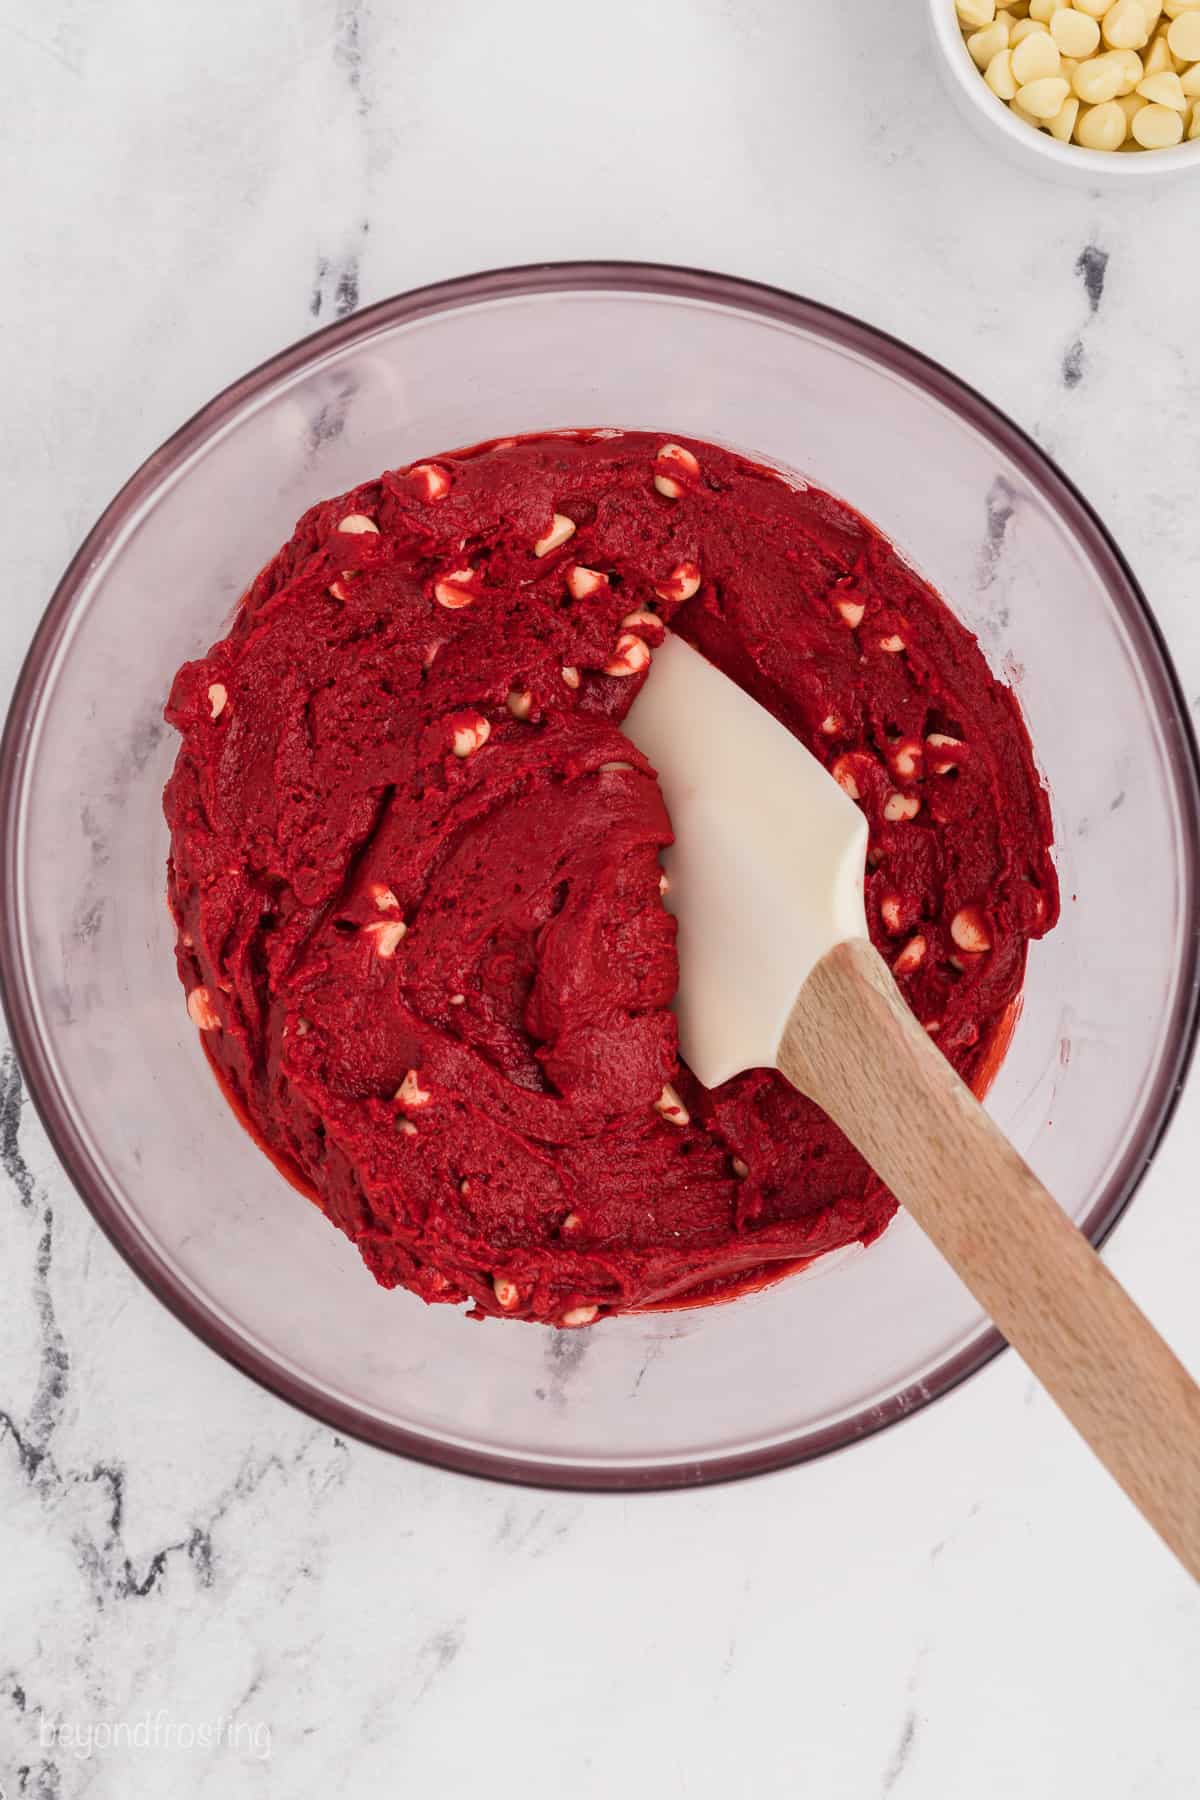 Red velvet cookie dough with white chocolate chips in a glass bowl with a spatula.